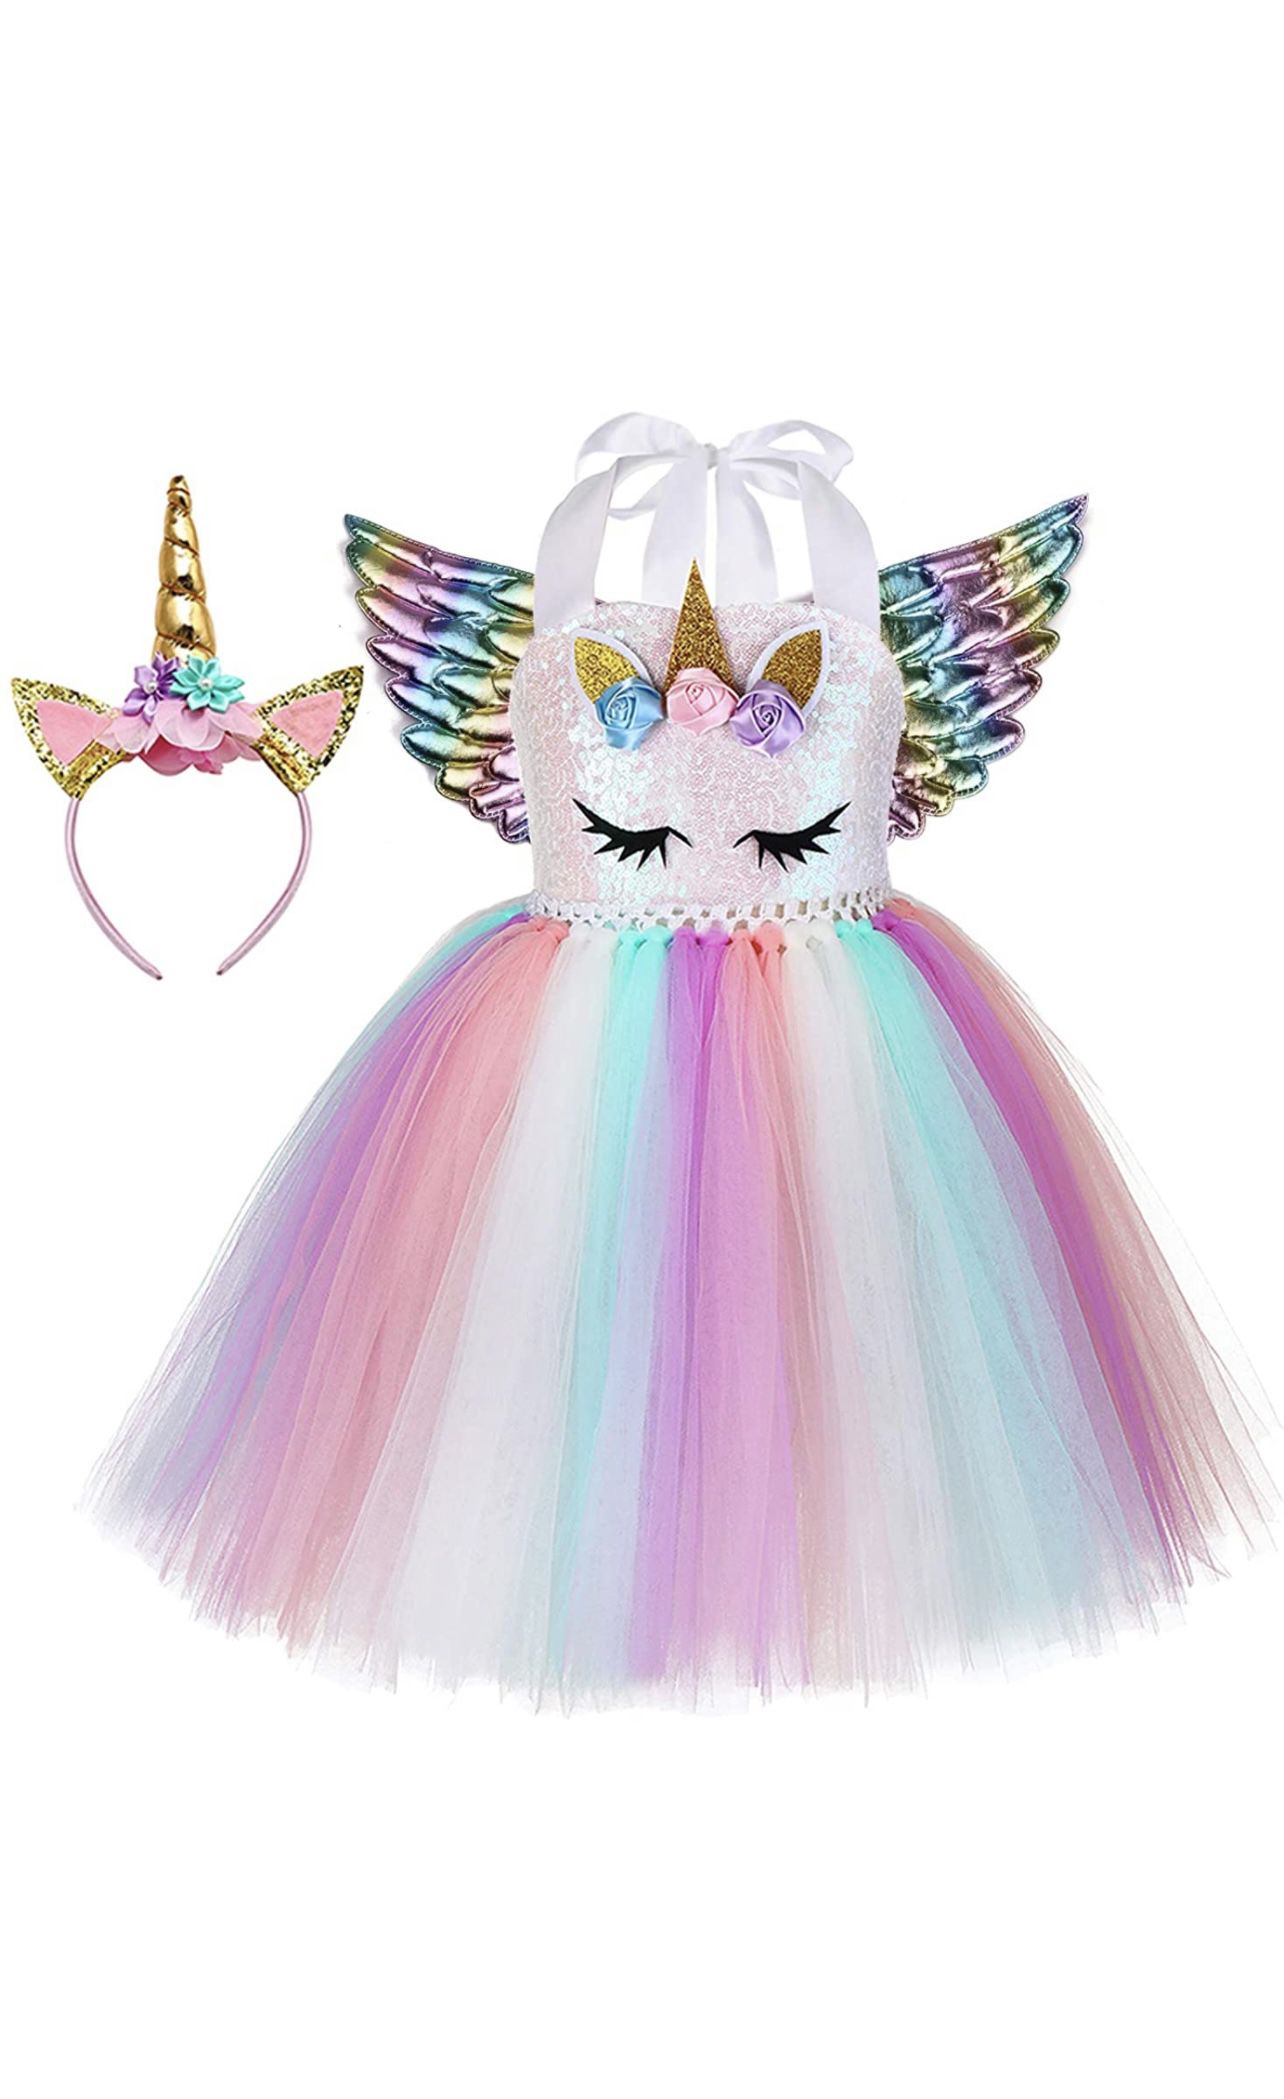 Tutu Dreams 3pcs Sequin Unicorn Dress with Wings and Headband for Girls 